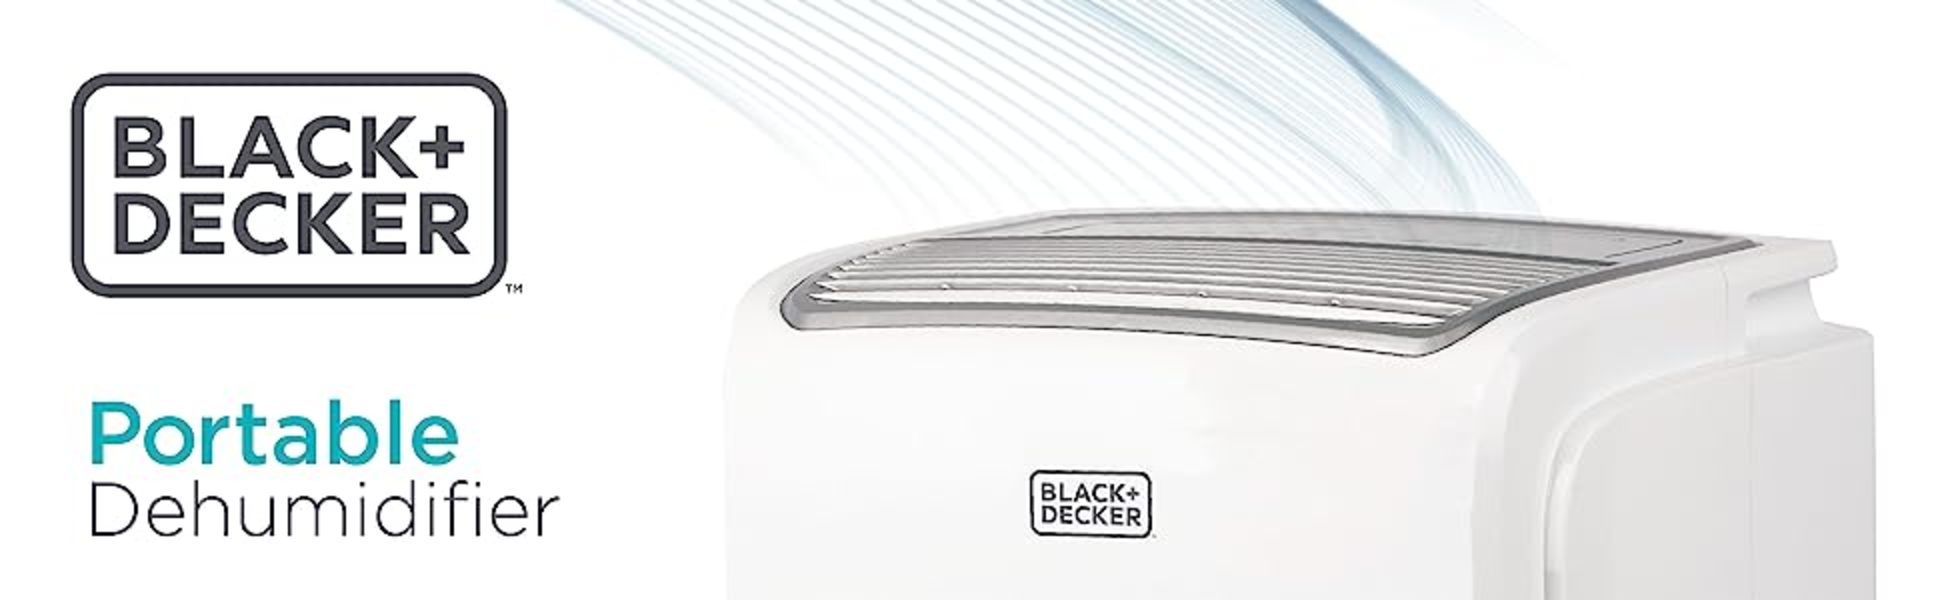 BLACK+DECKER 4500 Sq. Ft. Dehumidifier for Extra Large Spaces and  Basements, Energy Star Certified, BDT50WTB